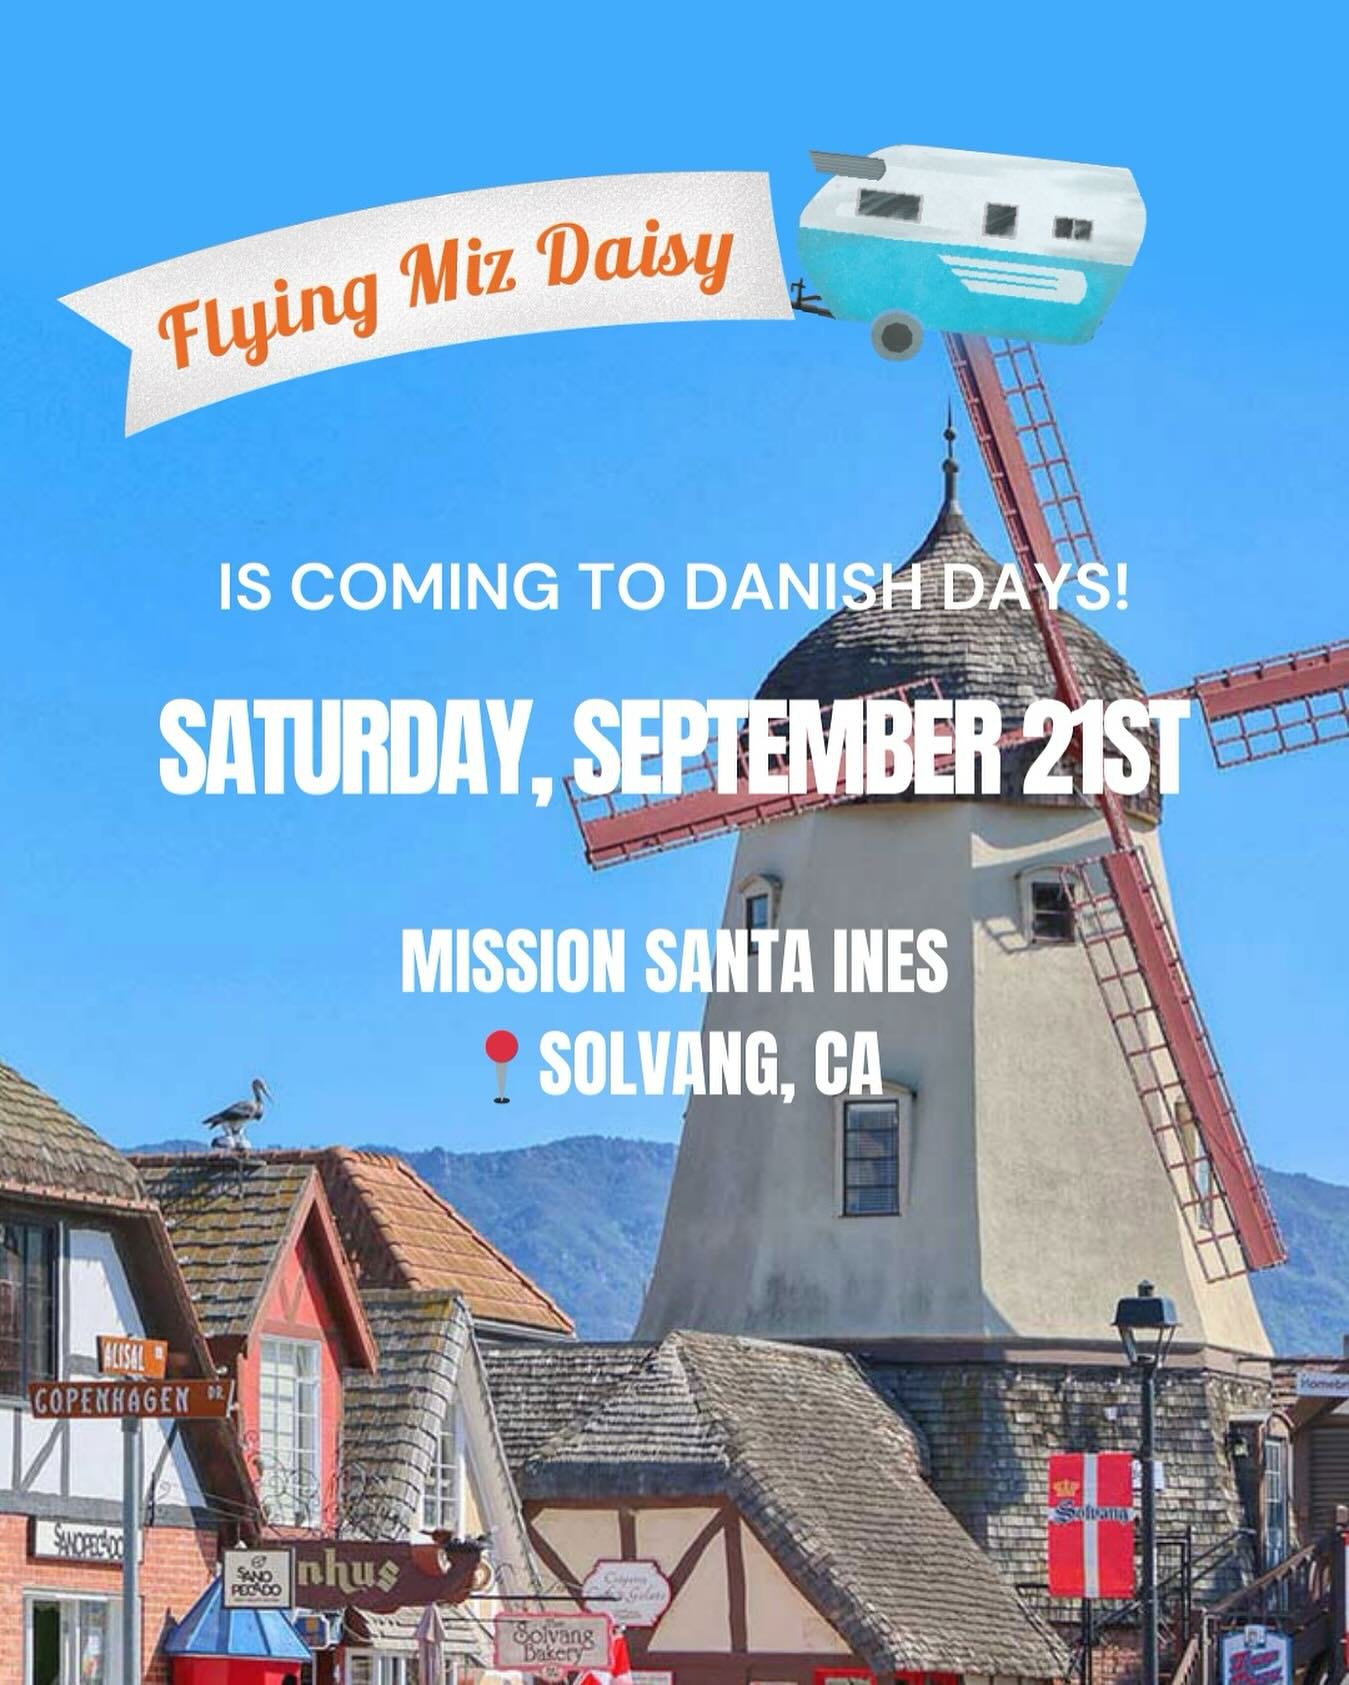 Save the Date! 🗓️ Join us Saturday SEPTEMBER 21st at the historic Old Mission Santa In&eacute;s for a Vintage Market like no other, during the fabulous Danish Days weekend in enchanting Solvang!!🇩🇰✨ 

#flyingmizdaisy #oldmissionsantaines #danishda